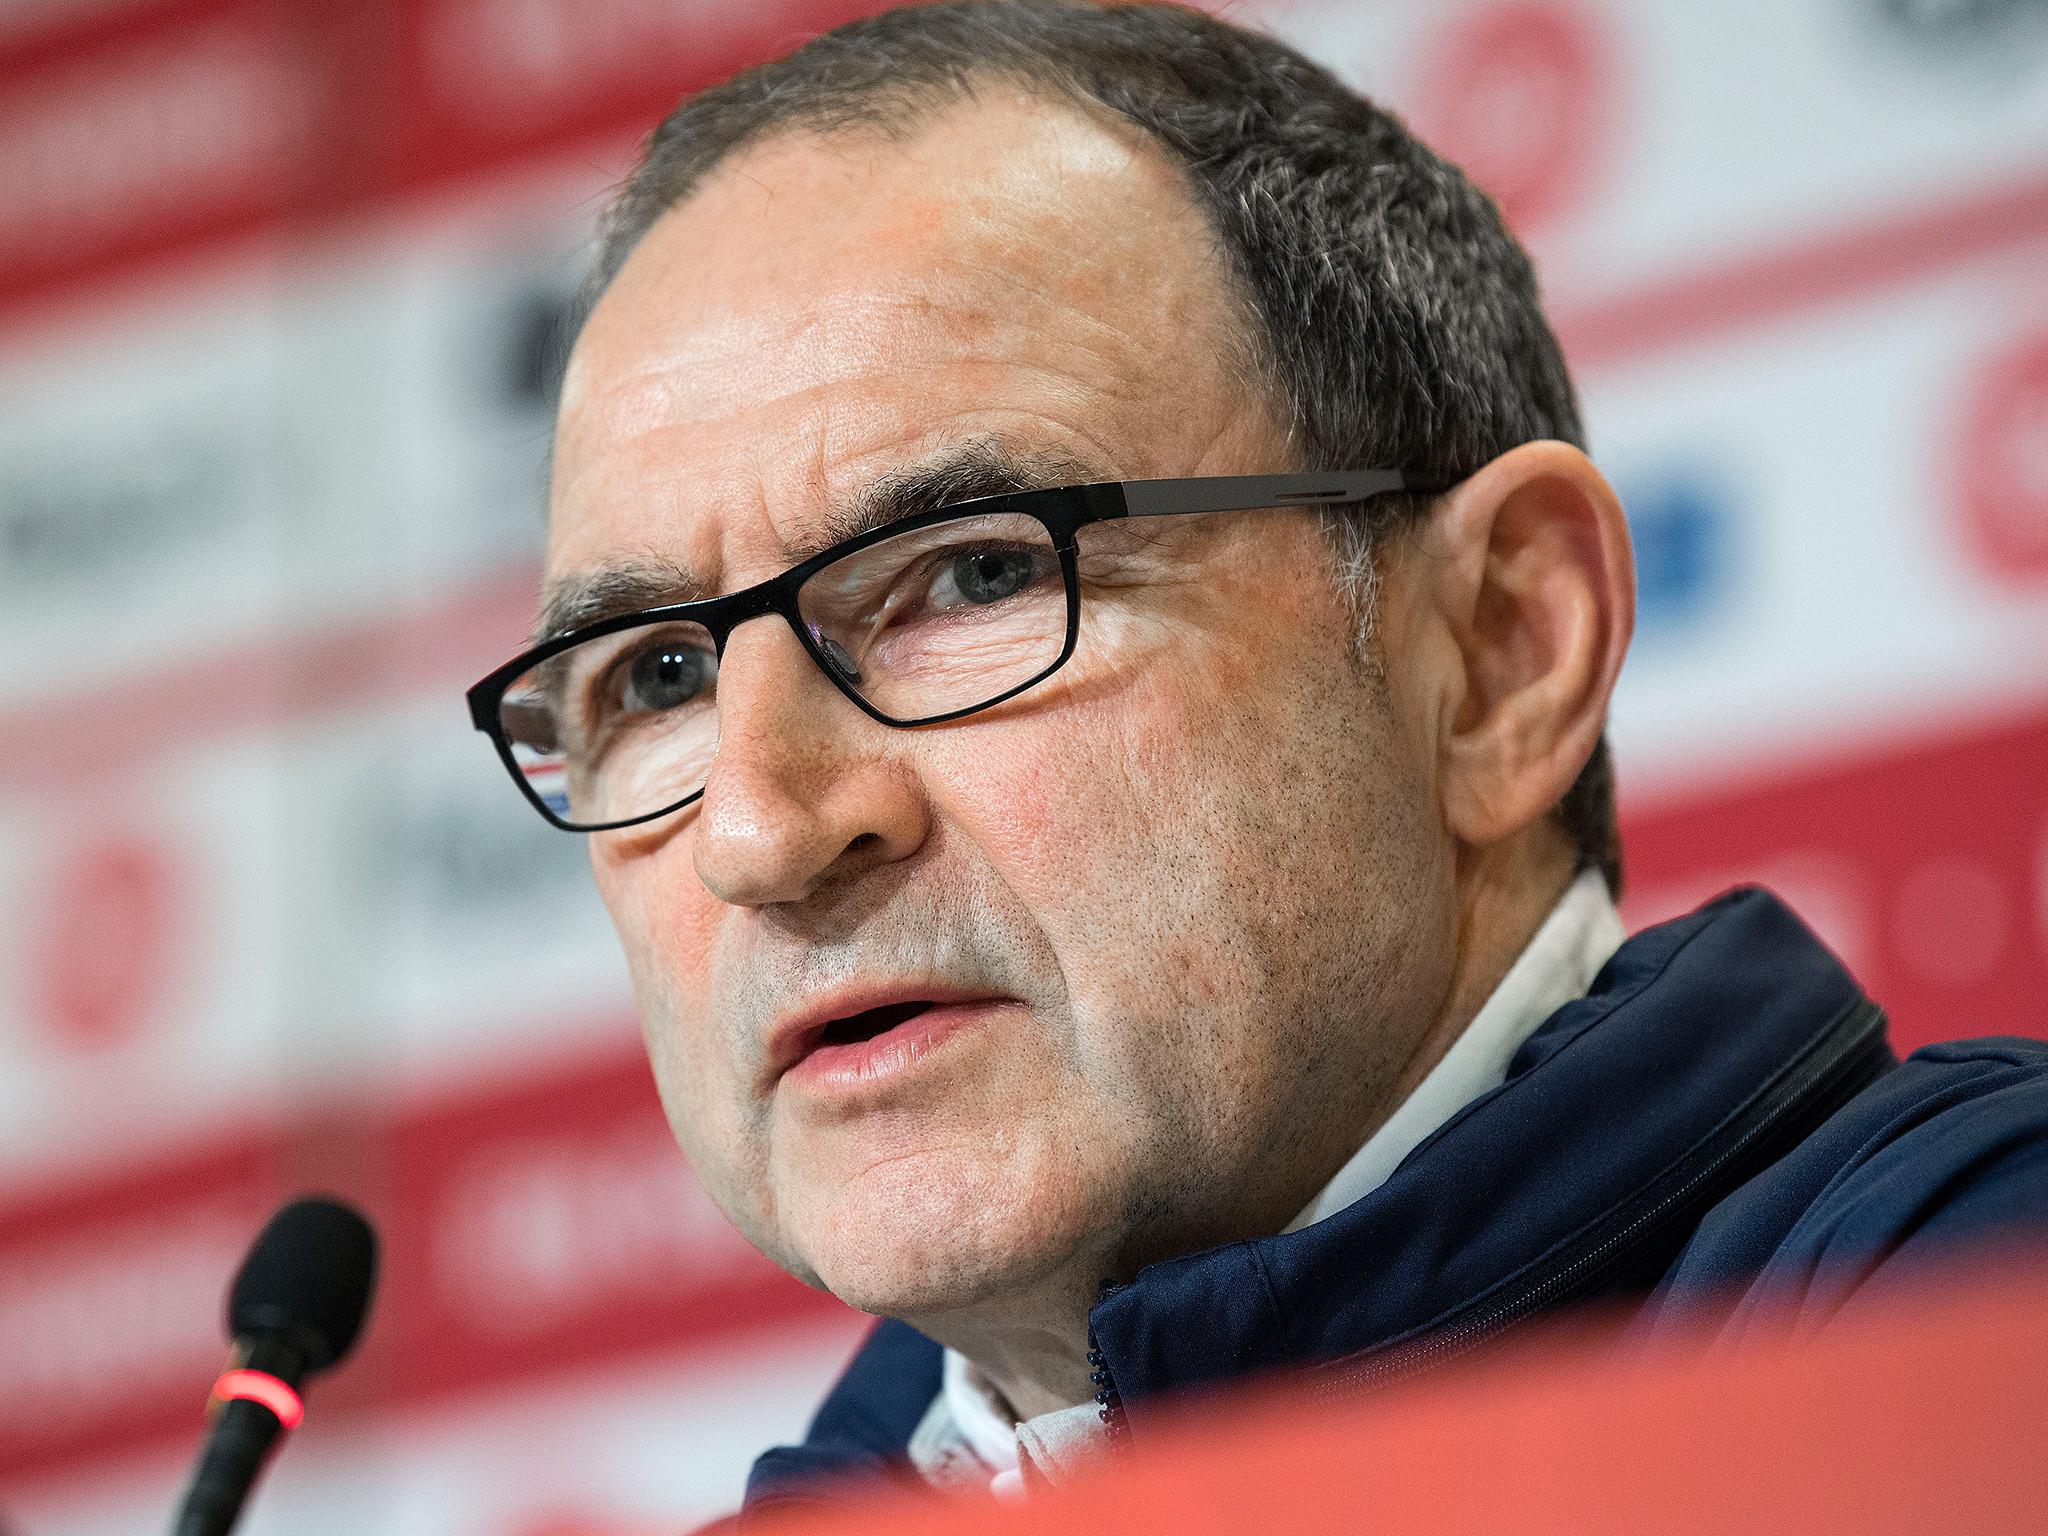 Martin O'Neill has rejected Stoke City's offer to become manager